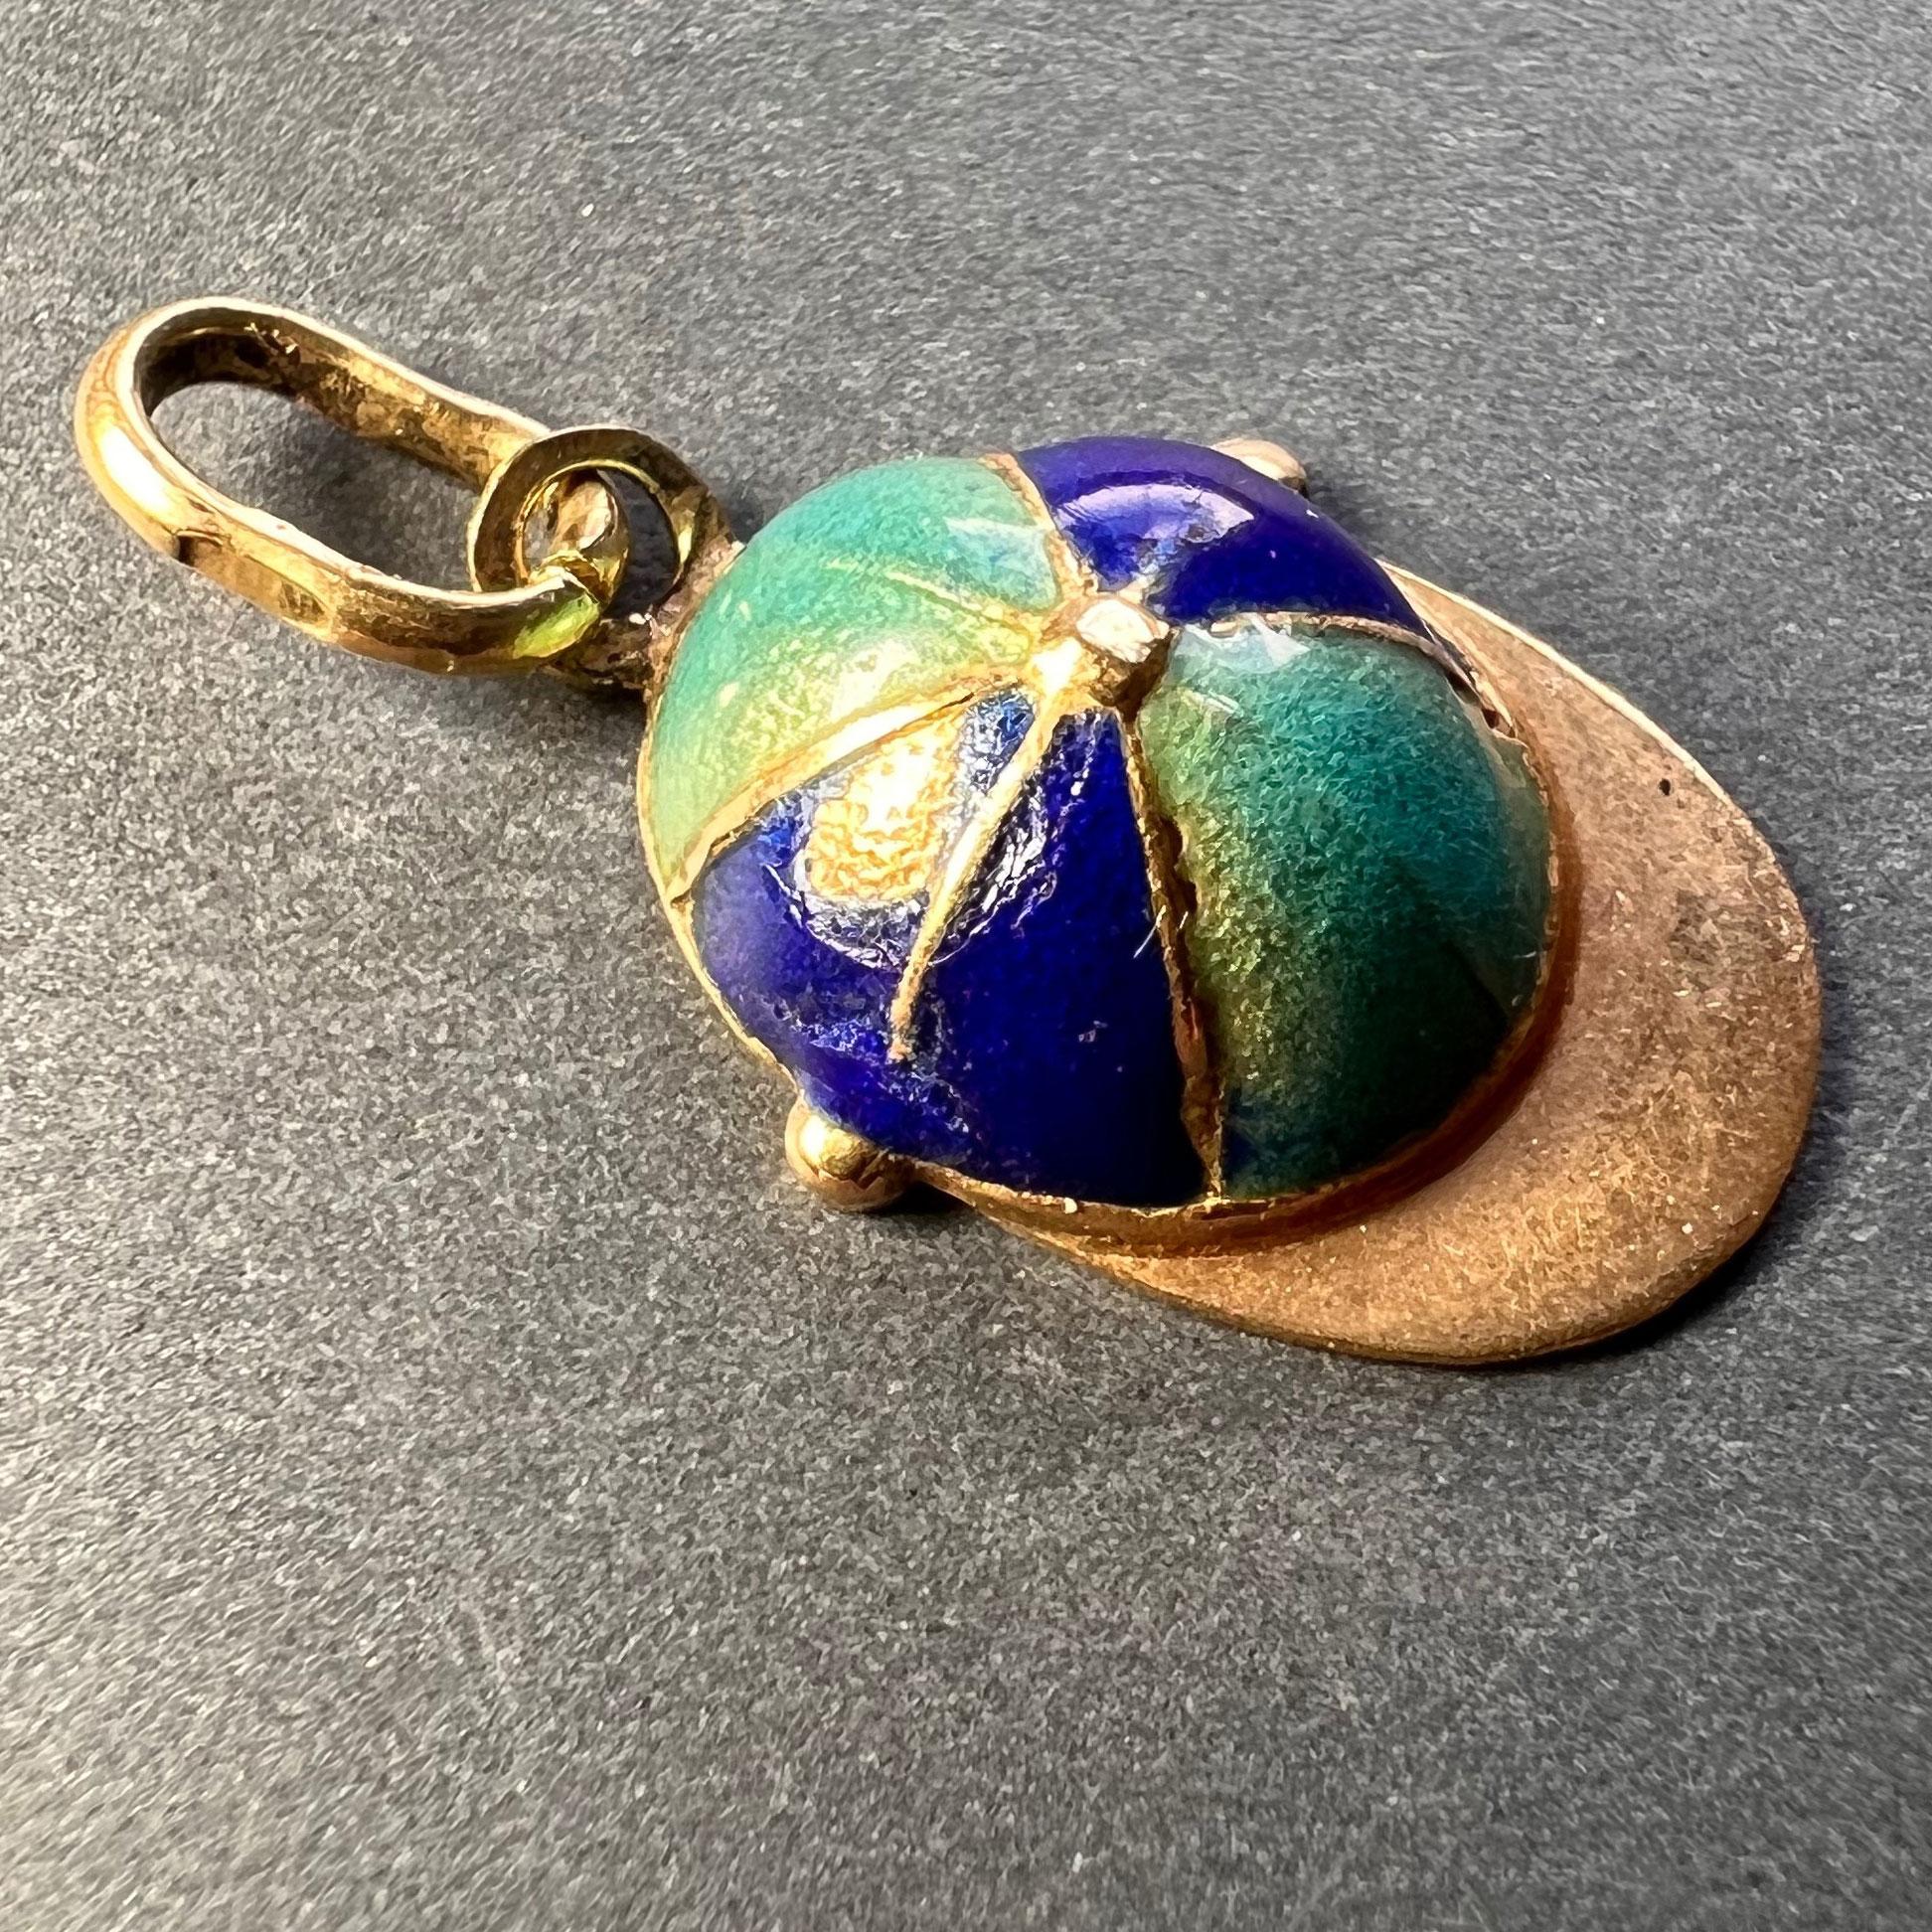 An 18 karat (18K) yellow gold charm pendant designed as a jockey hat with blue enamel detail. Stamped 750 for 18 karat gold and SA AR for Italian manufacture to the bail.
 
Dimensions: 1.8 x 1.2 x 0.5 cm (not including jump ring)
Weight: 1.44 grams
